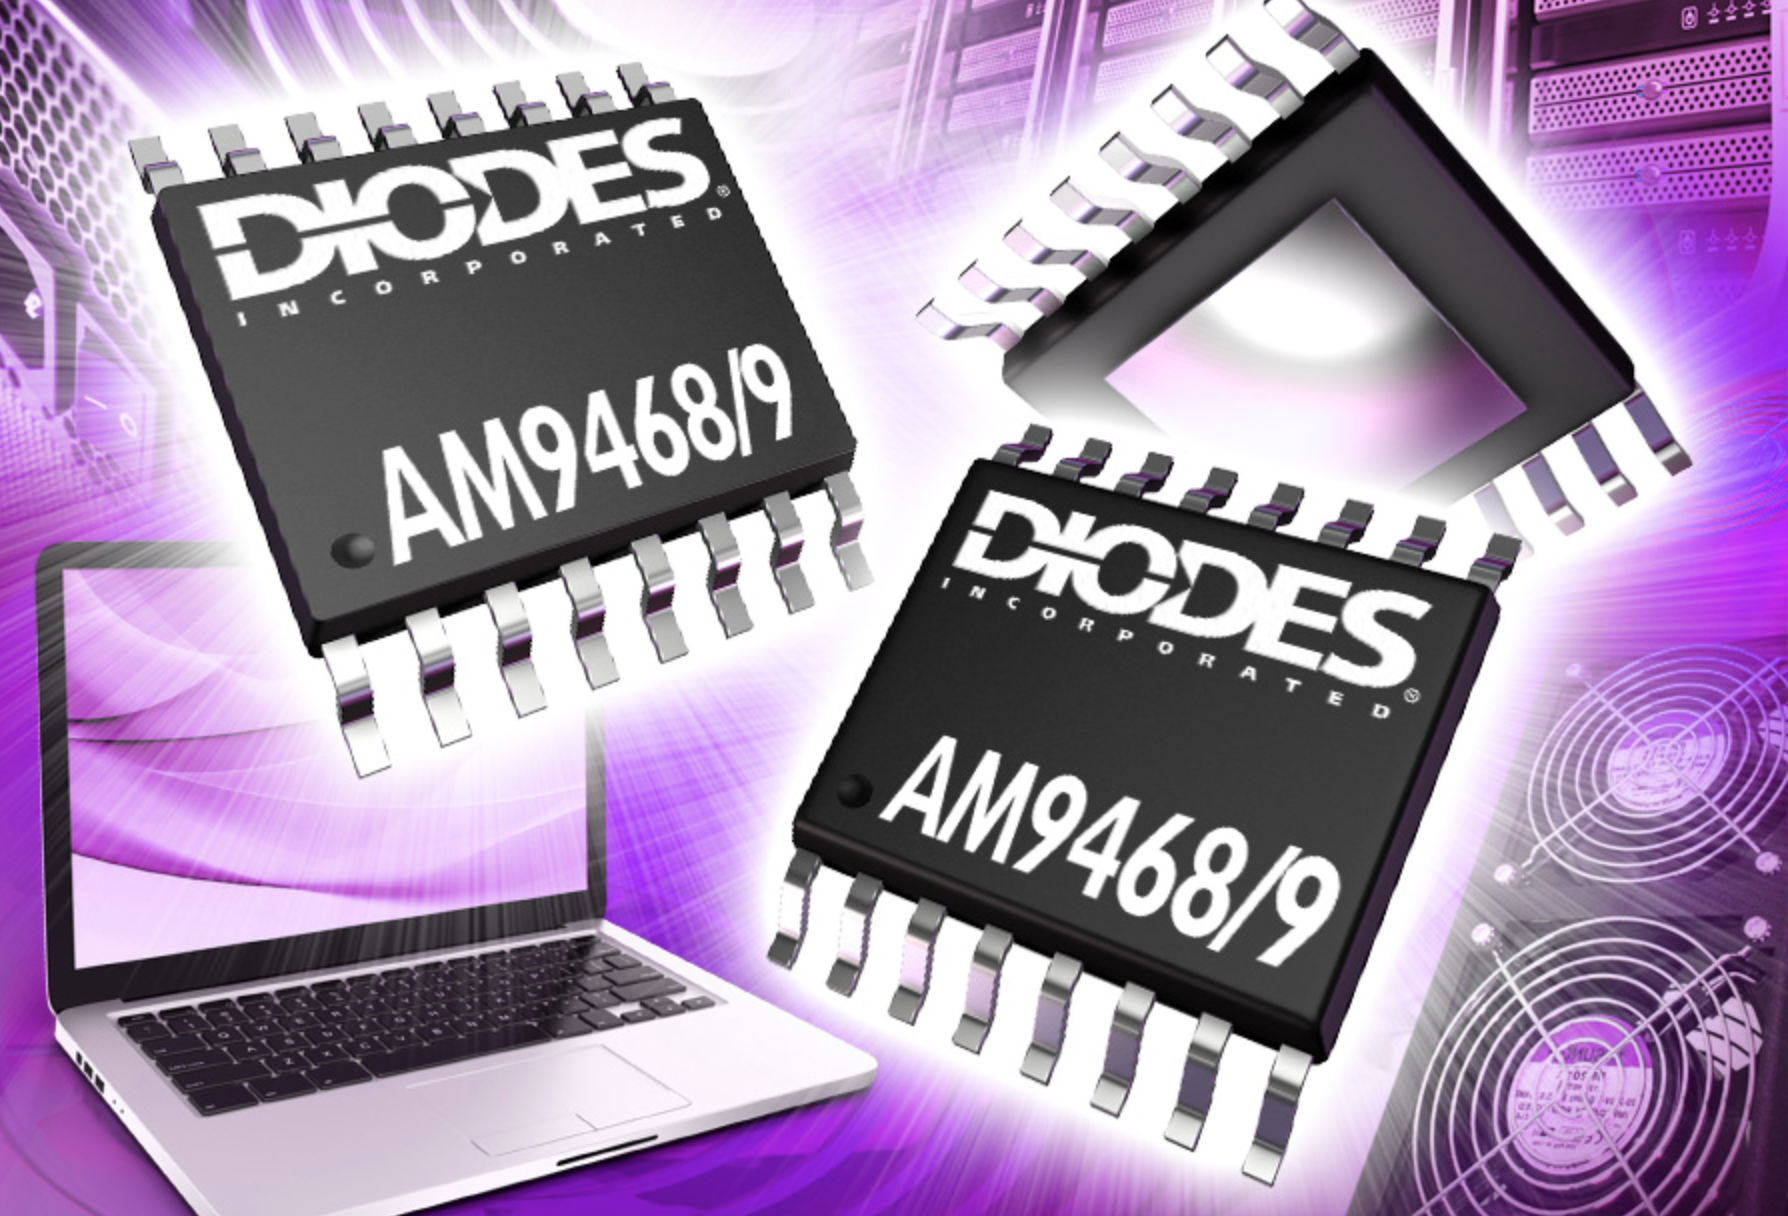 Diode's brushless DC full-bridge motor driver offers PWM or DC-voltage speed control